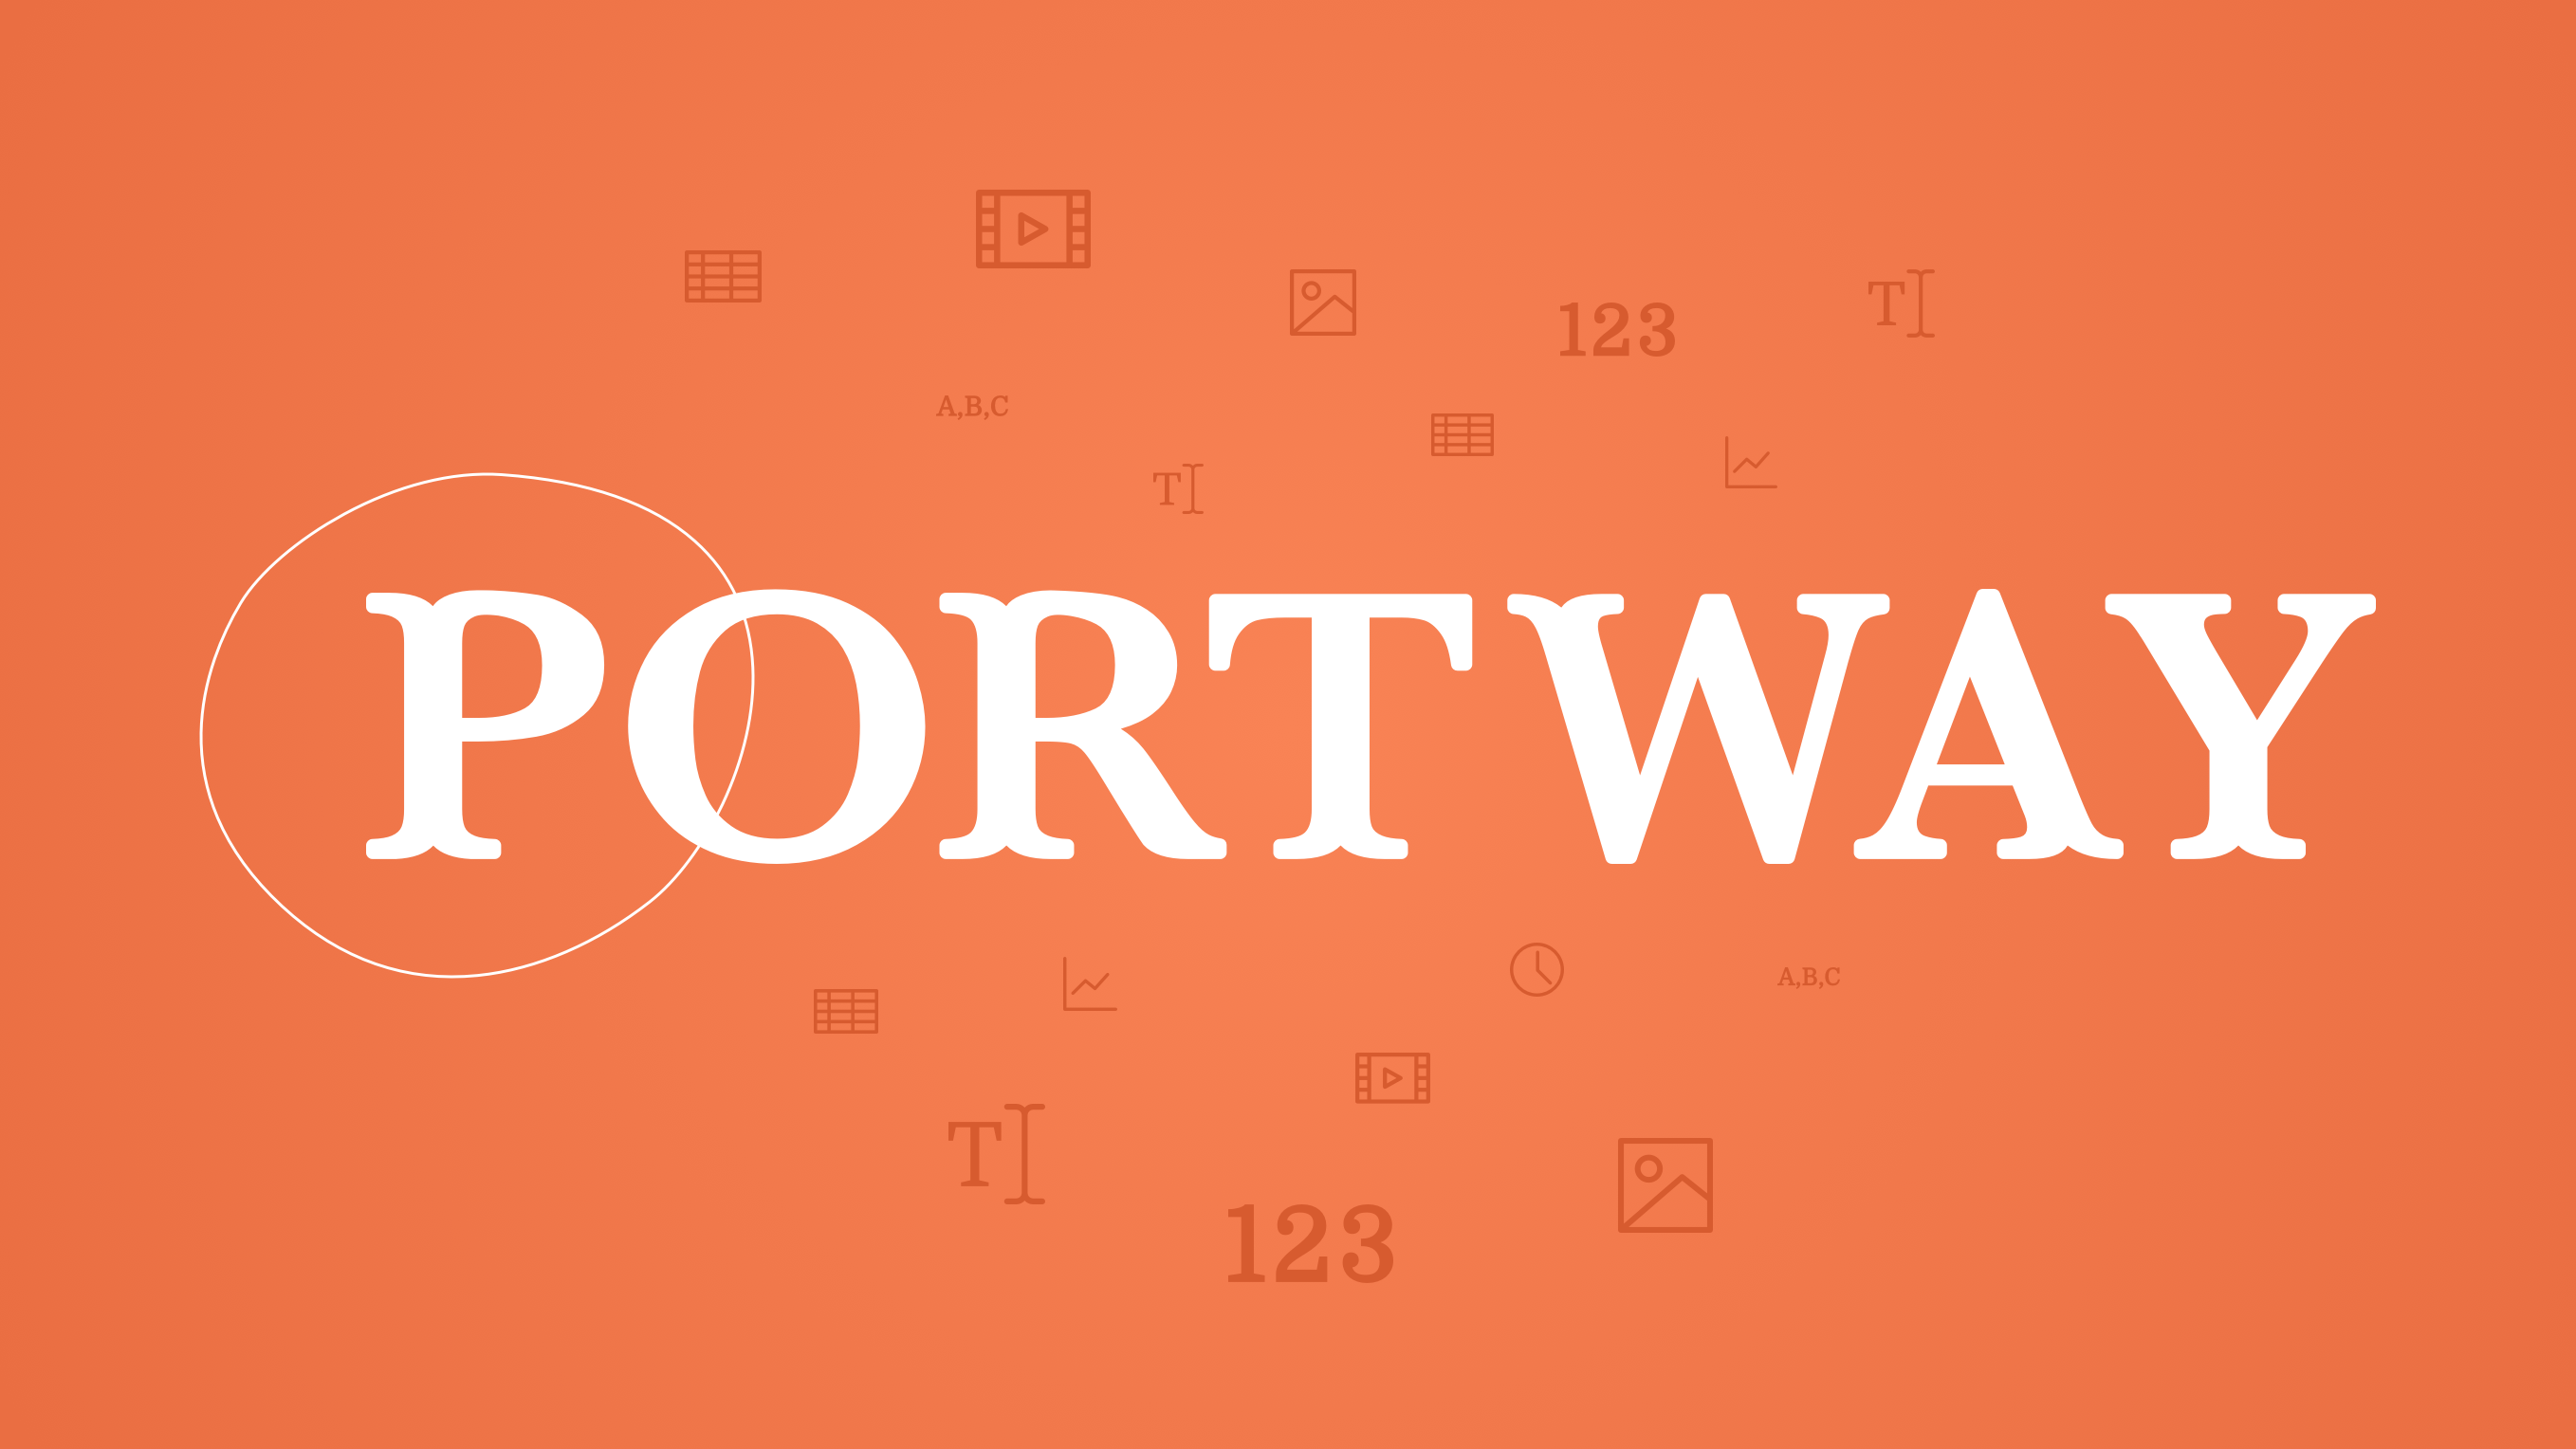 Find detailed information about Portway